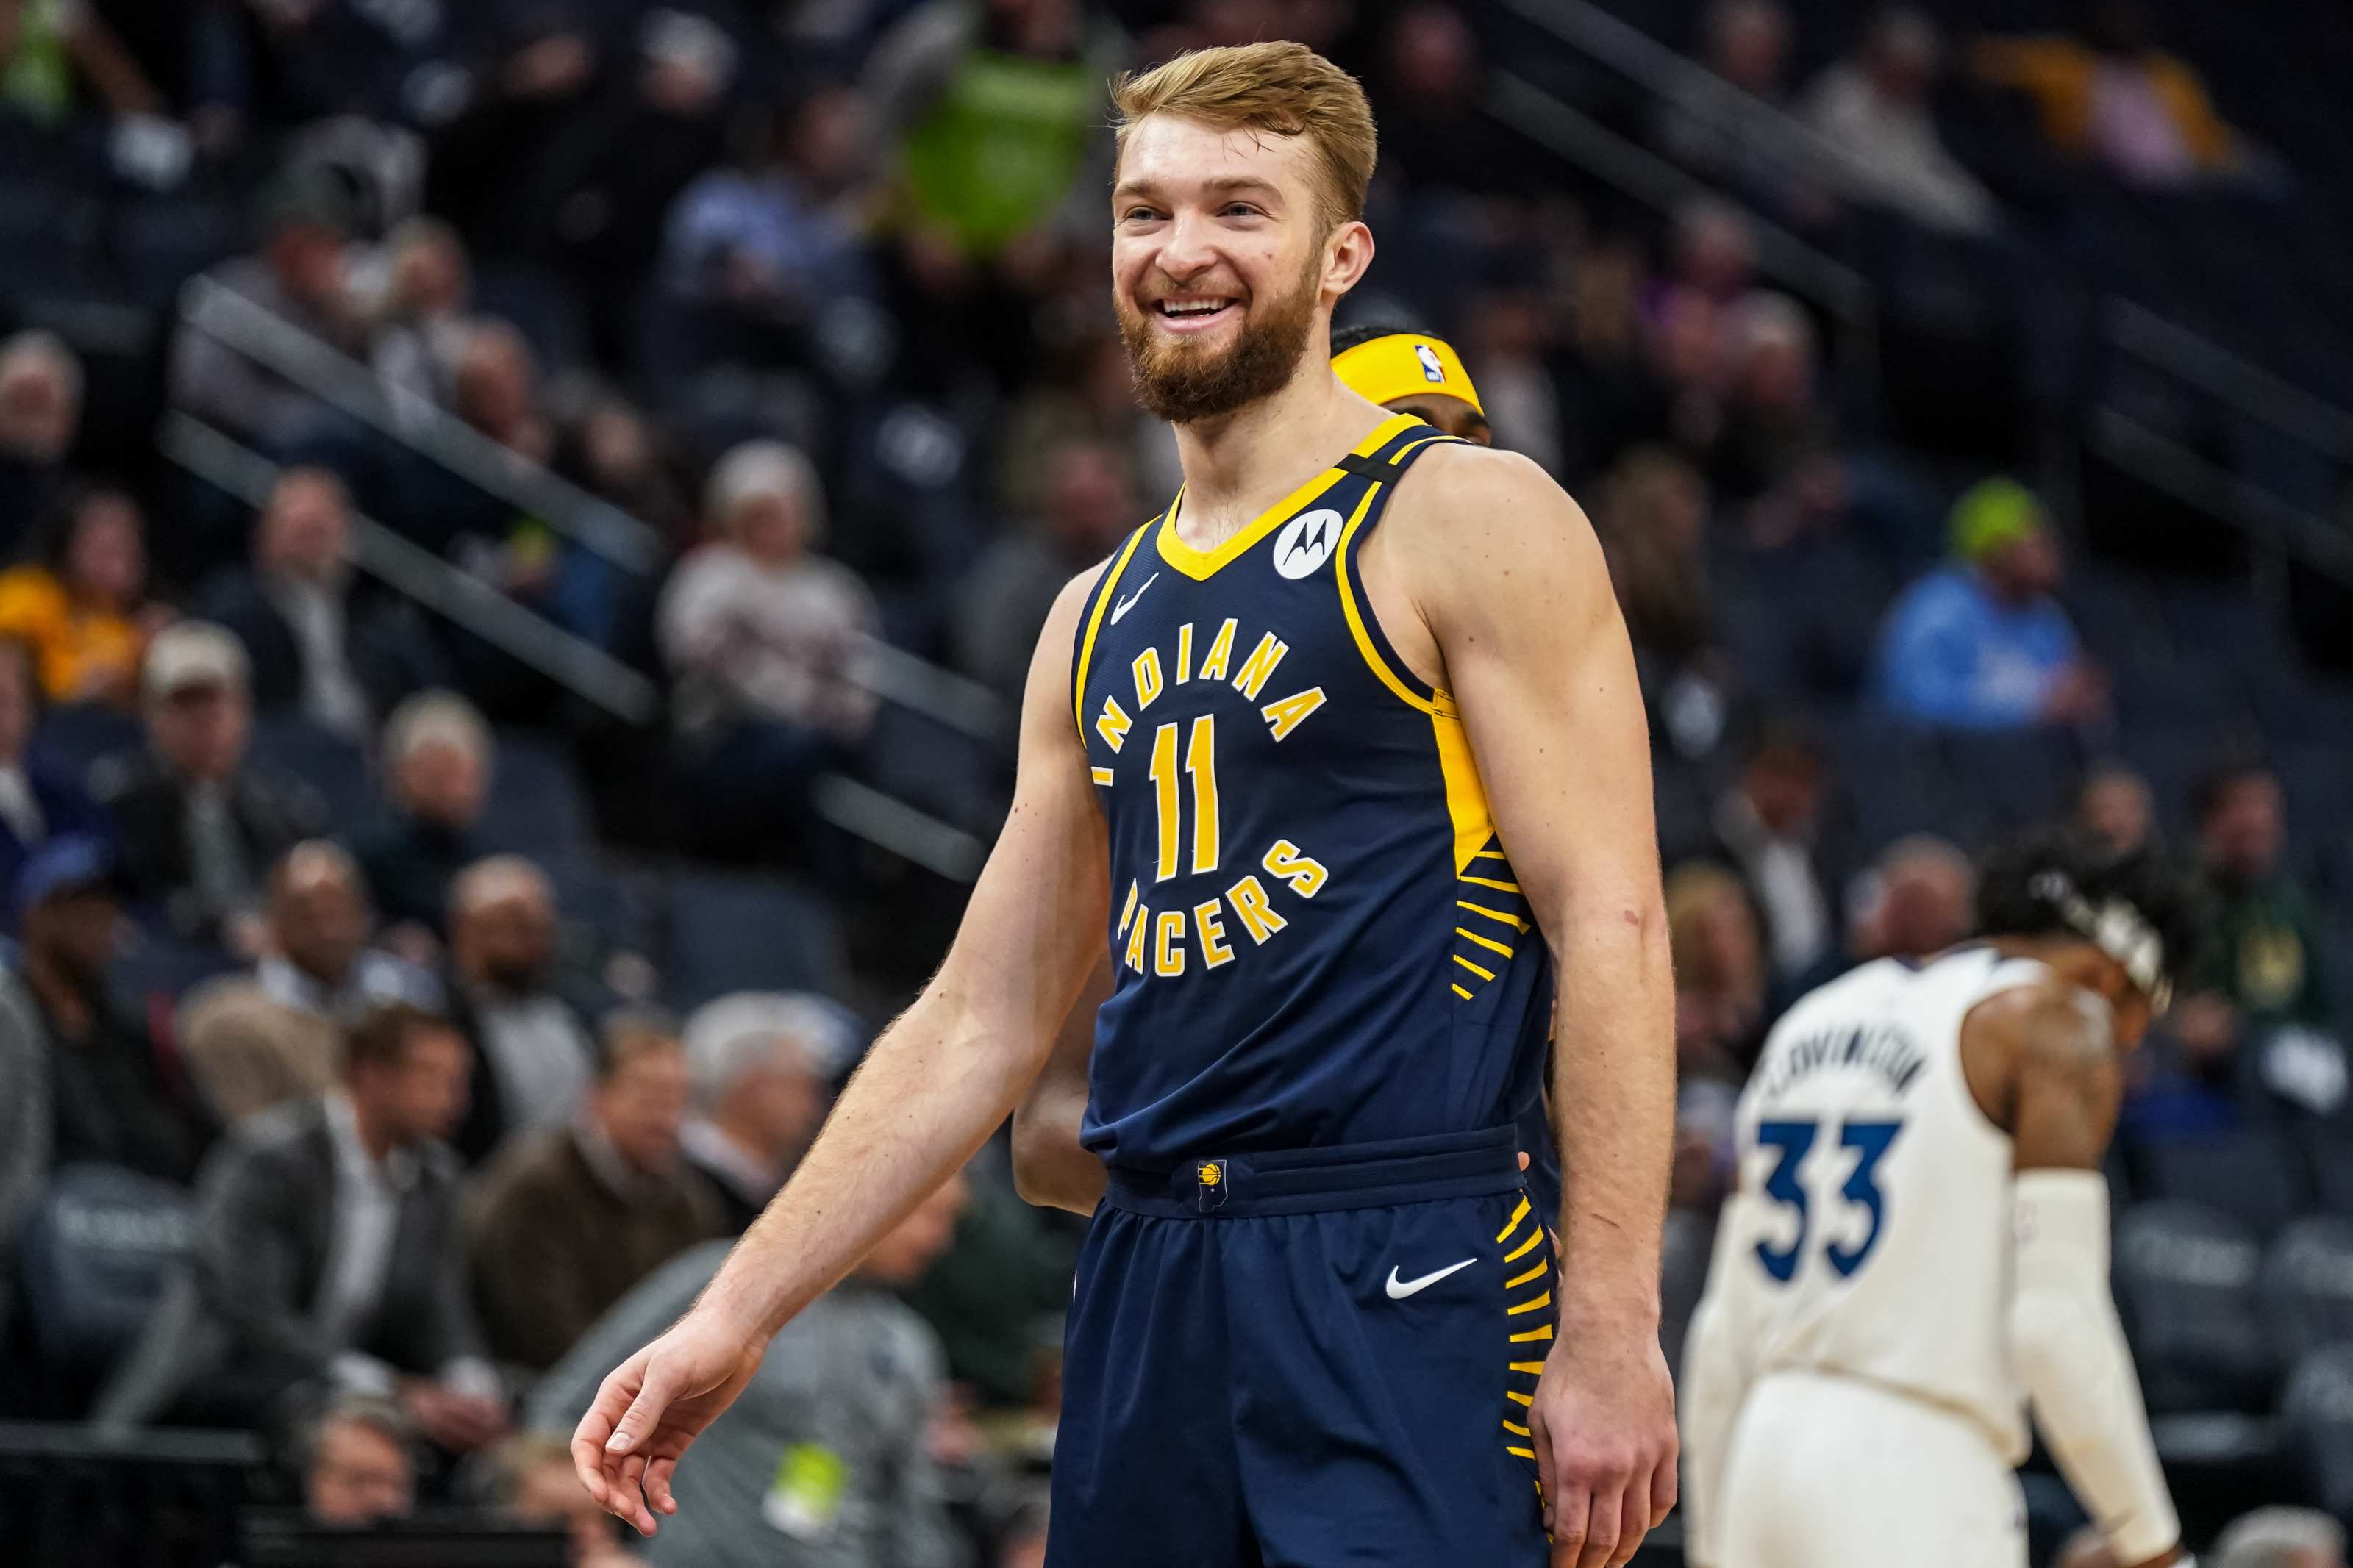 Indiana Pacers: Domantas Sabonis for All-Star game